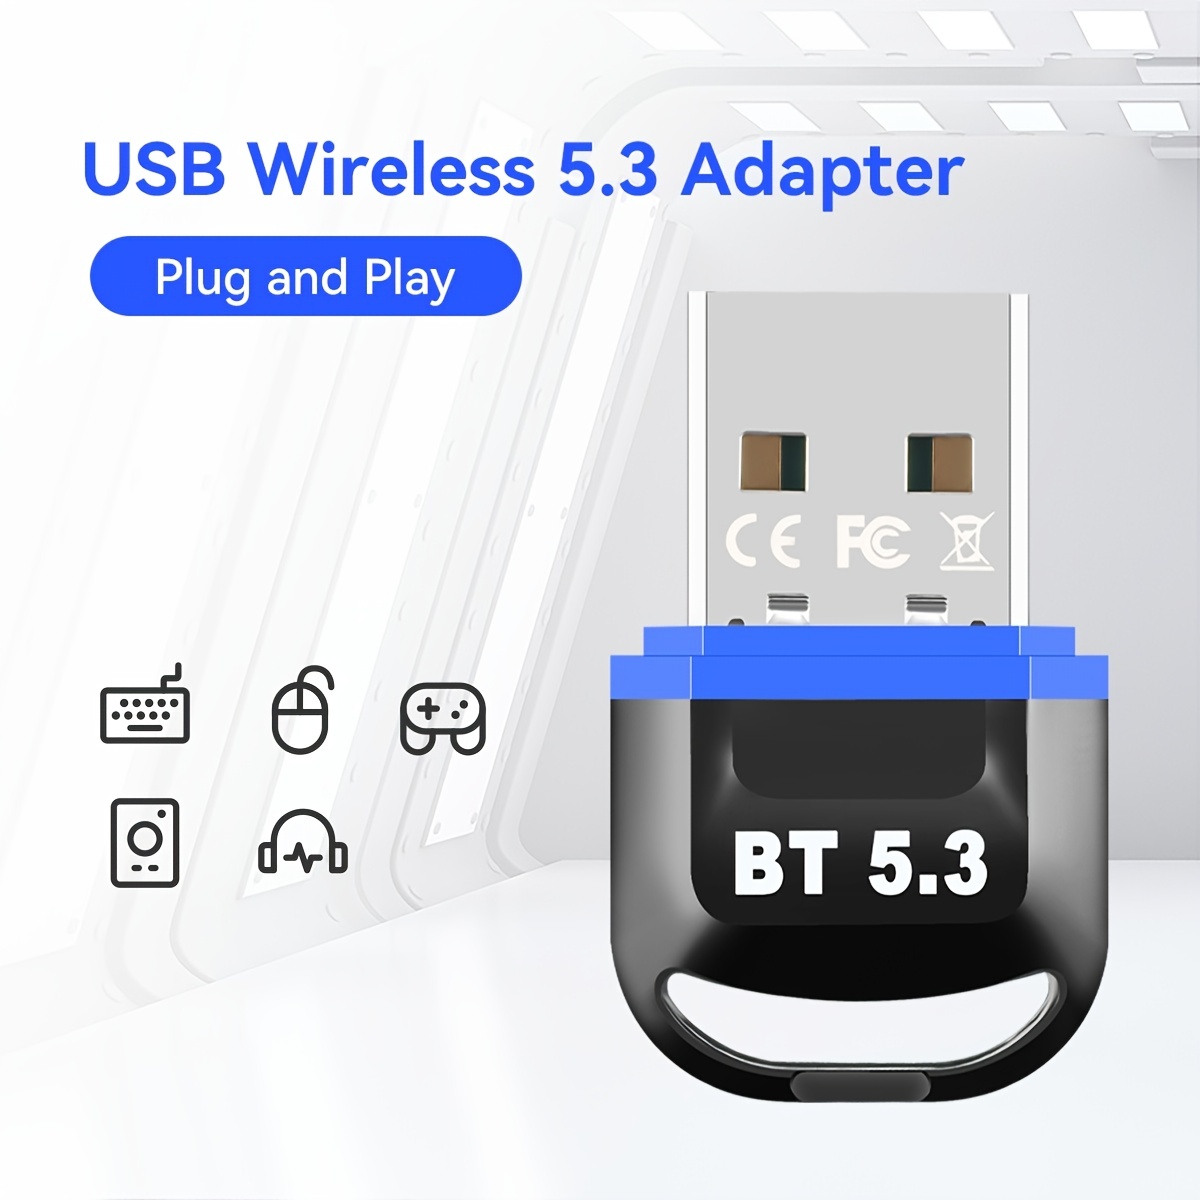 USB Bluetooth 5.3 Dongle Adapter for PC Laptop Computer Desktop